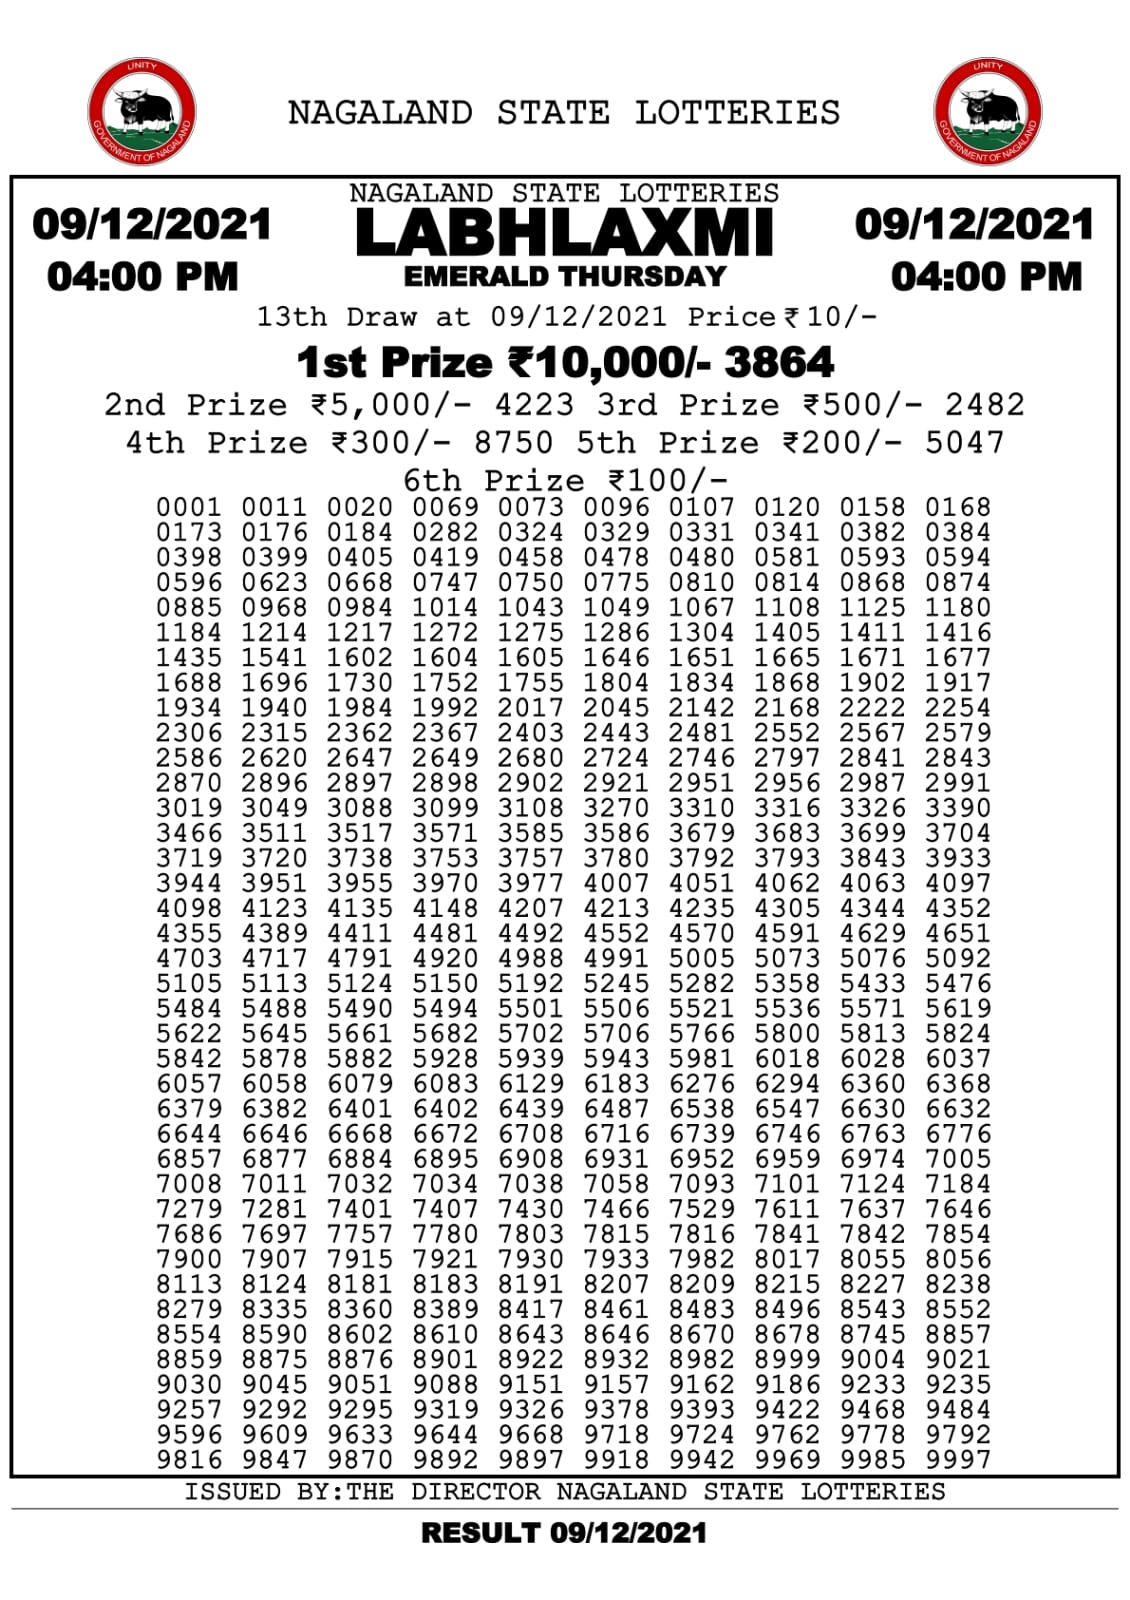 Labhlaxmi 4.00pm Lottery Result 09.12.2021